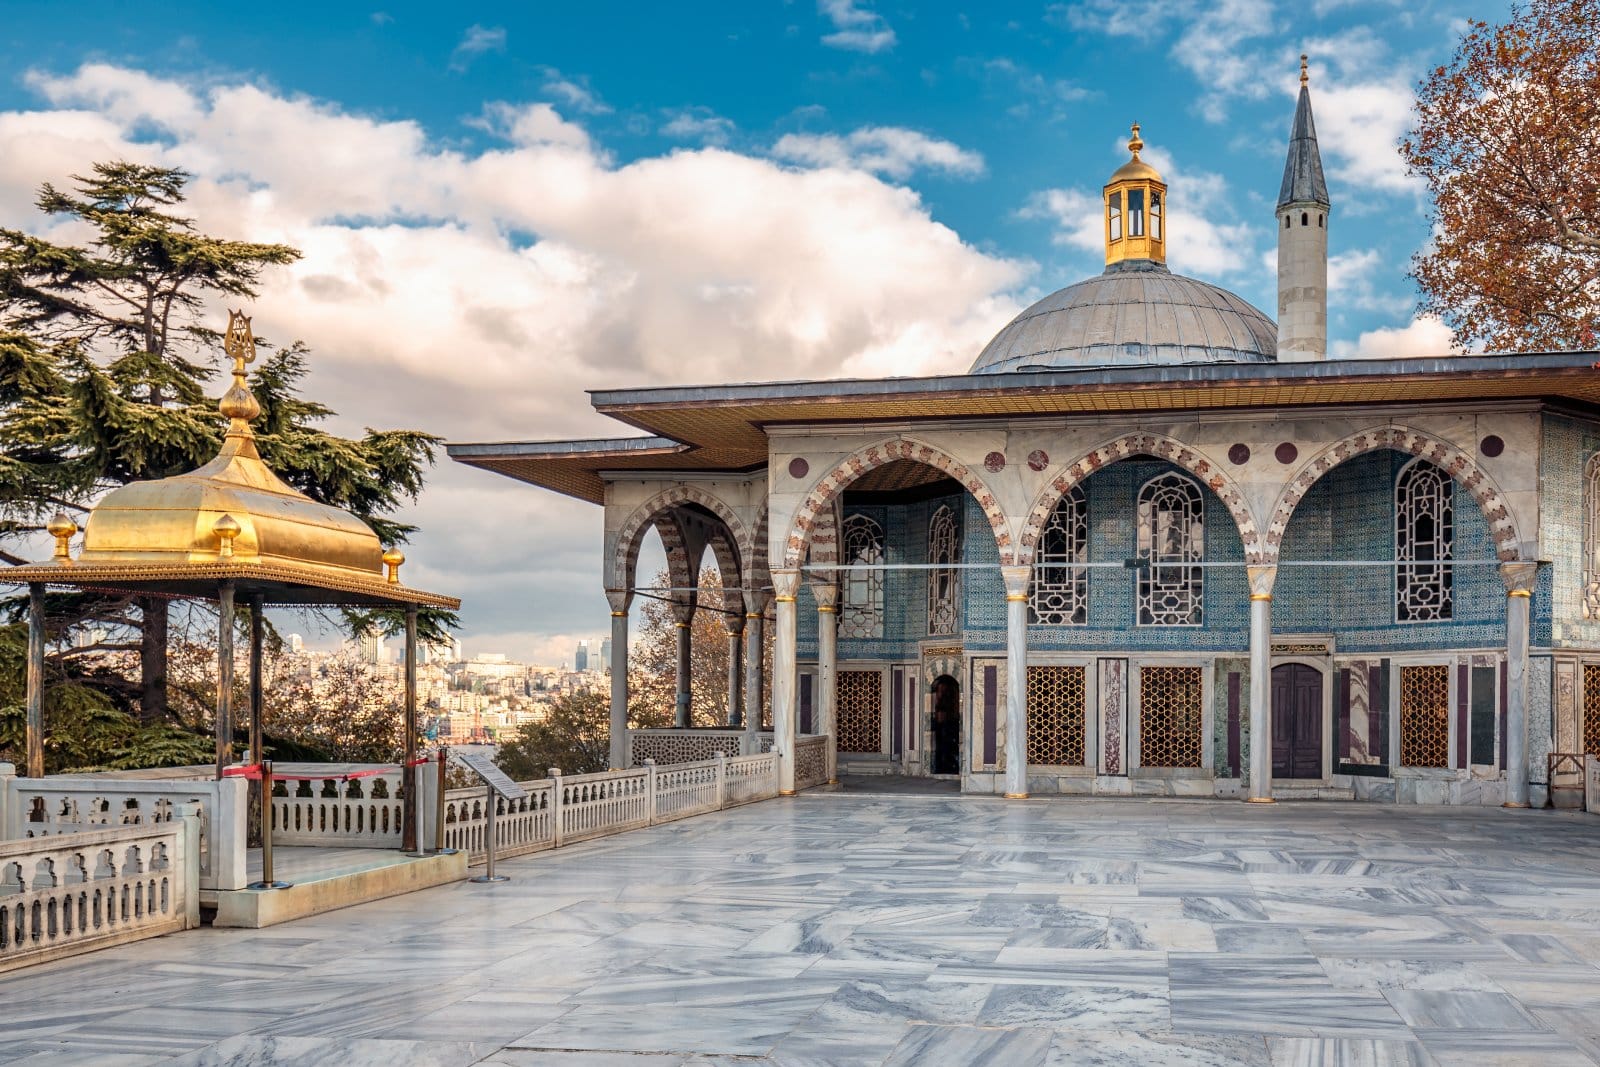 <p class="wp-caption-text">Image Credit: Shutterstock / RuslanKphoto</p>  <p><span>Topkapi Palace, once the residence of Ottoman sultans, now serves as a museum showcasing imperial collections, including the Prophet Muhammad’s cloak and sword. The palace complex is an architectural marvel featuring opulent courtyards, intricate tilework, and panoramic views of the Bosphorus. Exploring its chambers offers a glimpse into the lavish lifestyle of the Ottoman elite and the empire’s administrative heart.</span></p>